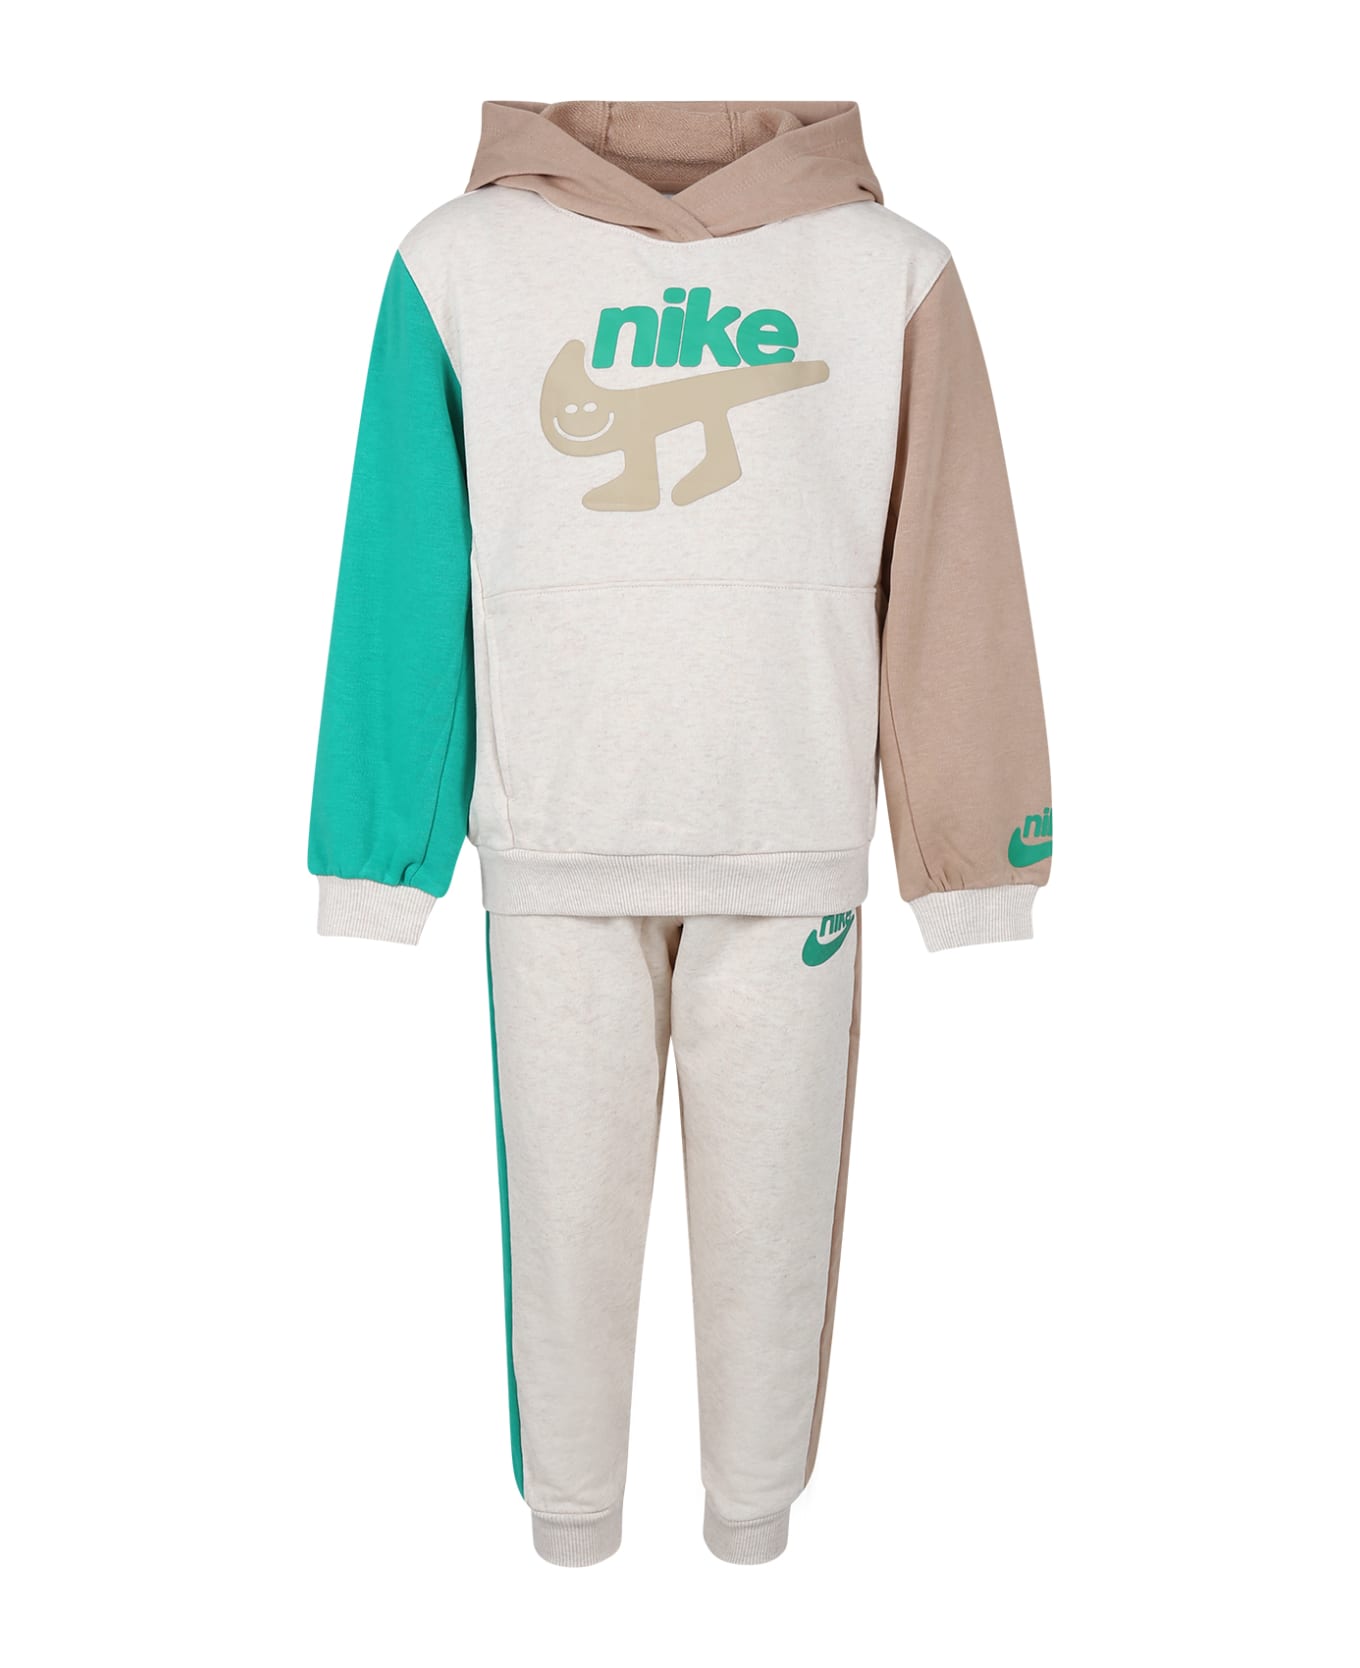 Nike Multicolored Set For Boy With Logo - Multicolor ボトムス